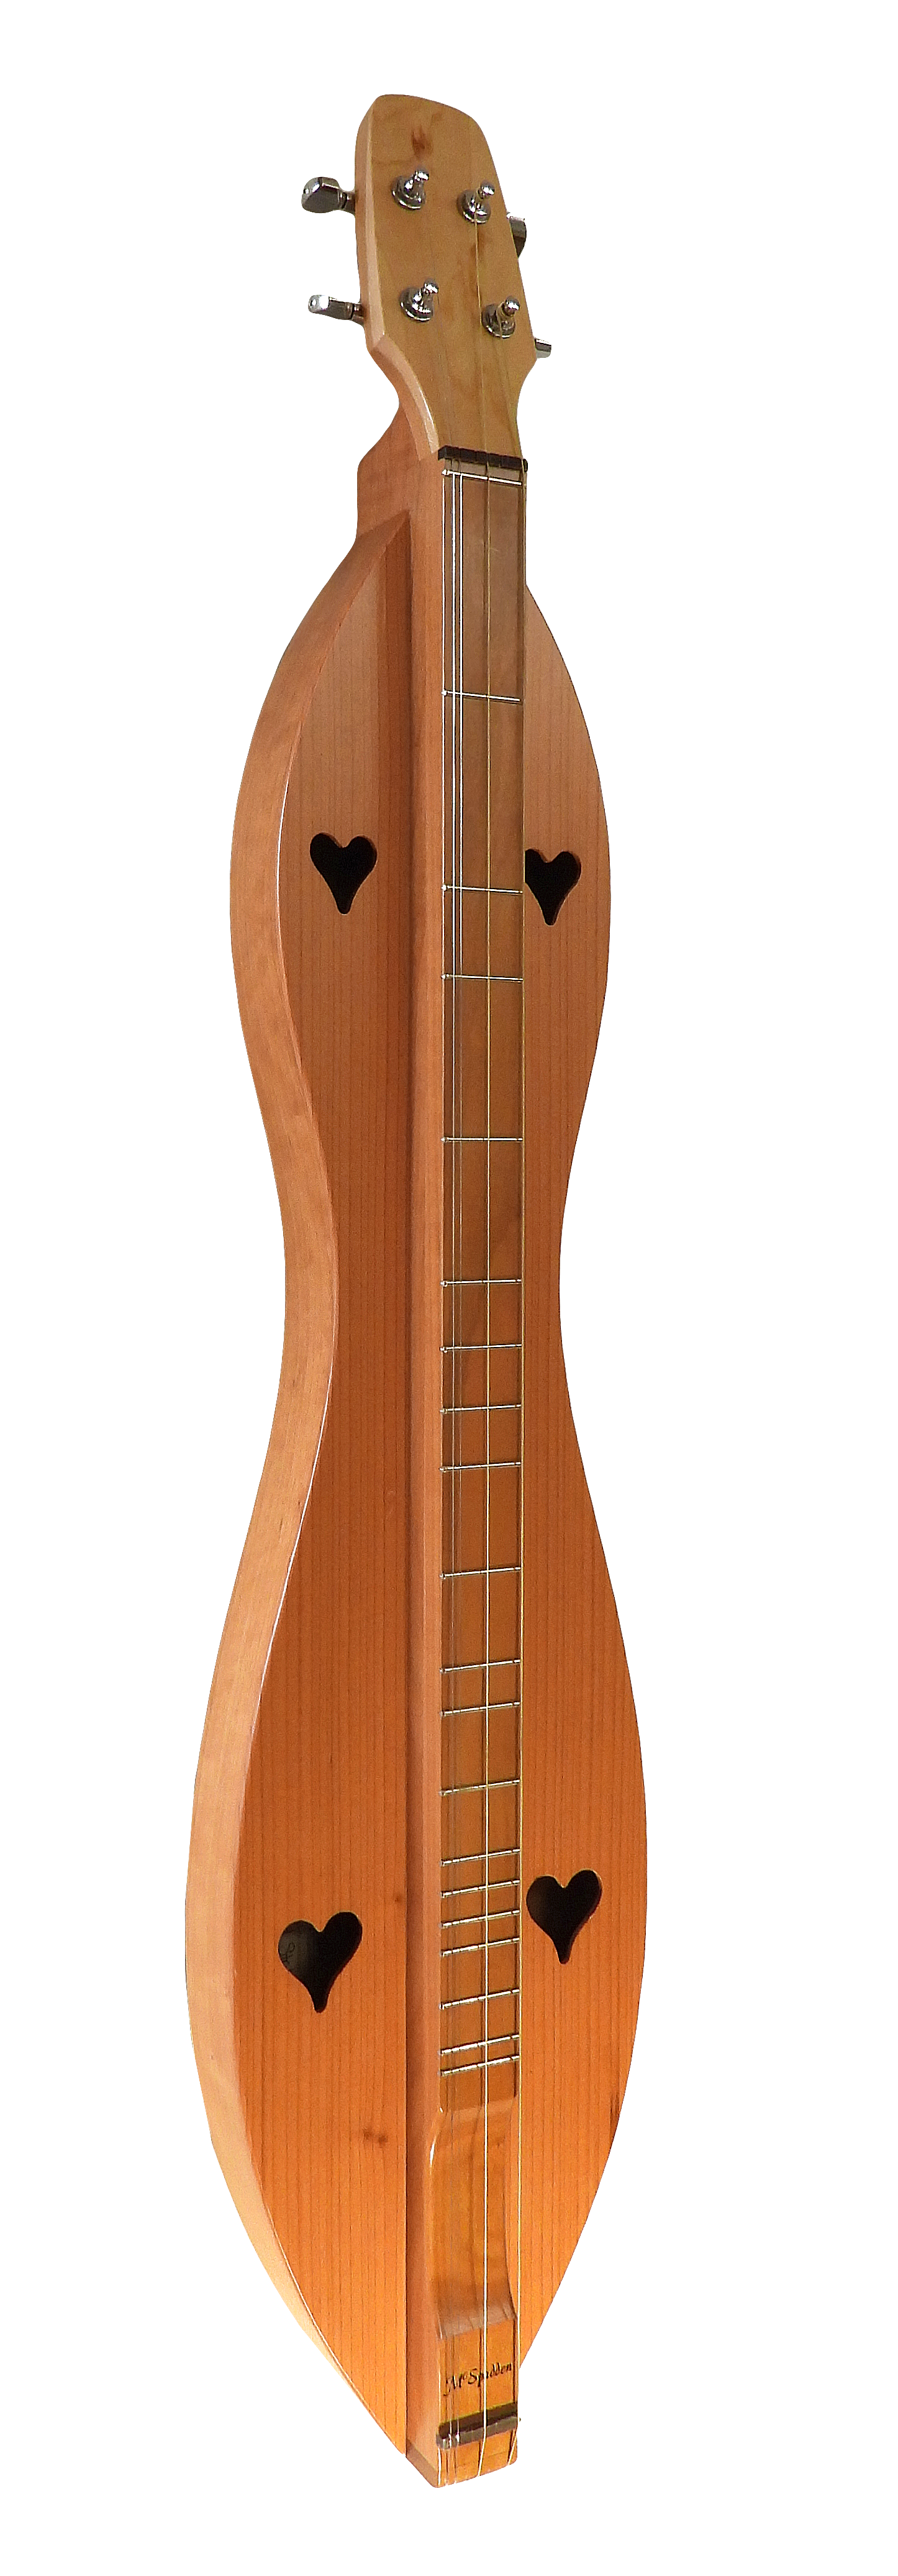 A 4FHCRB, a wooden ukulele with a black and white design, comes with a lifetime warranty.